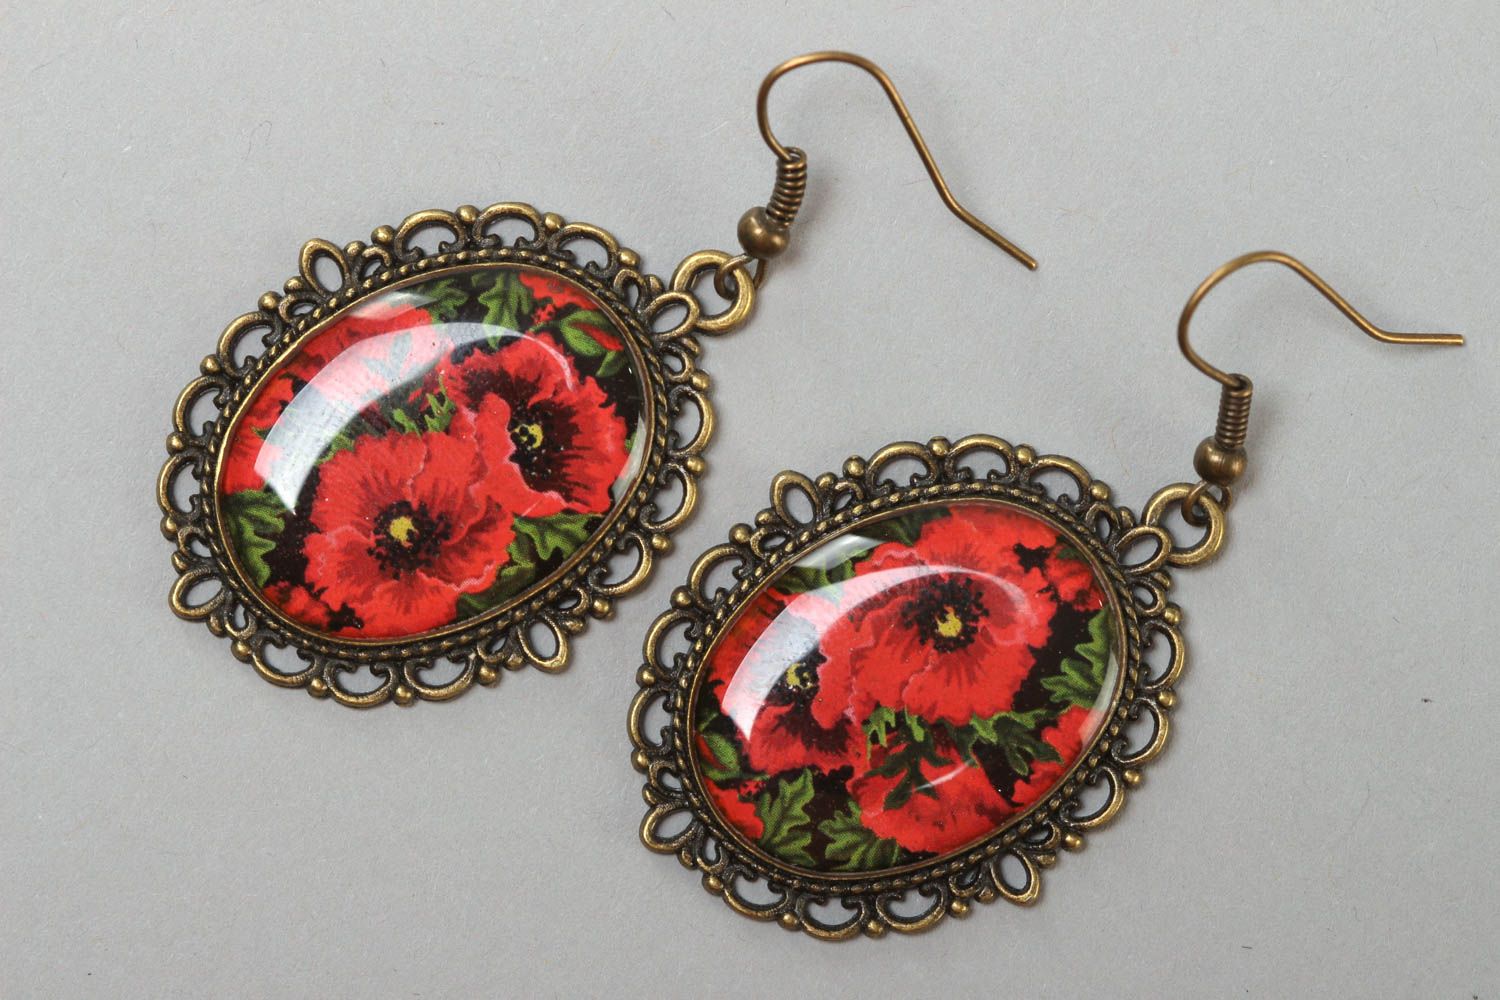 Egg-shaped vintage handmade earrings made of glass glaze with red poppies photo 2